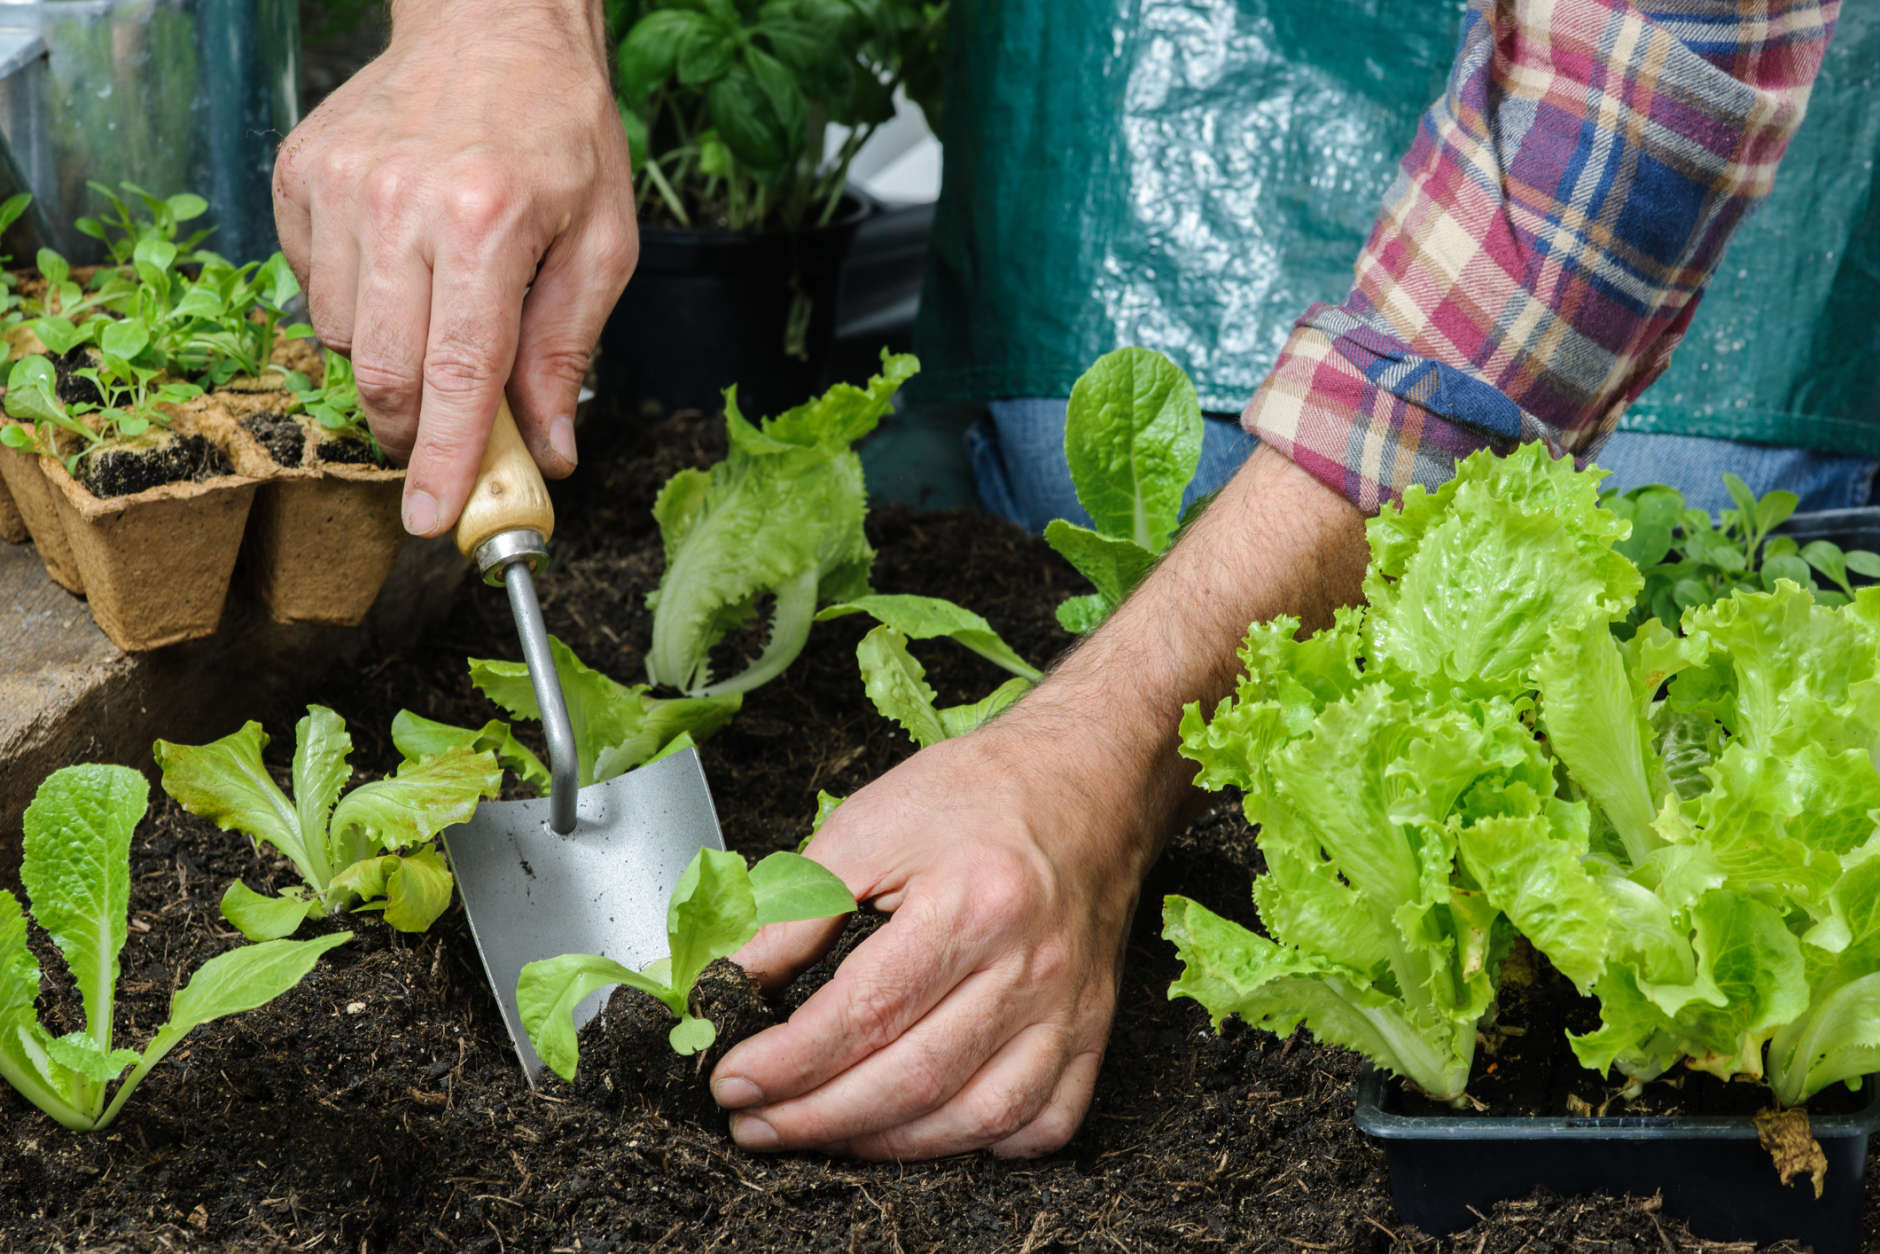 Gardening is good for your health. (Thinkstock)